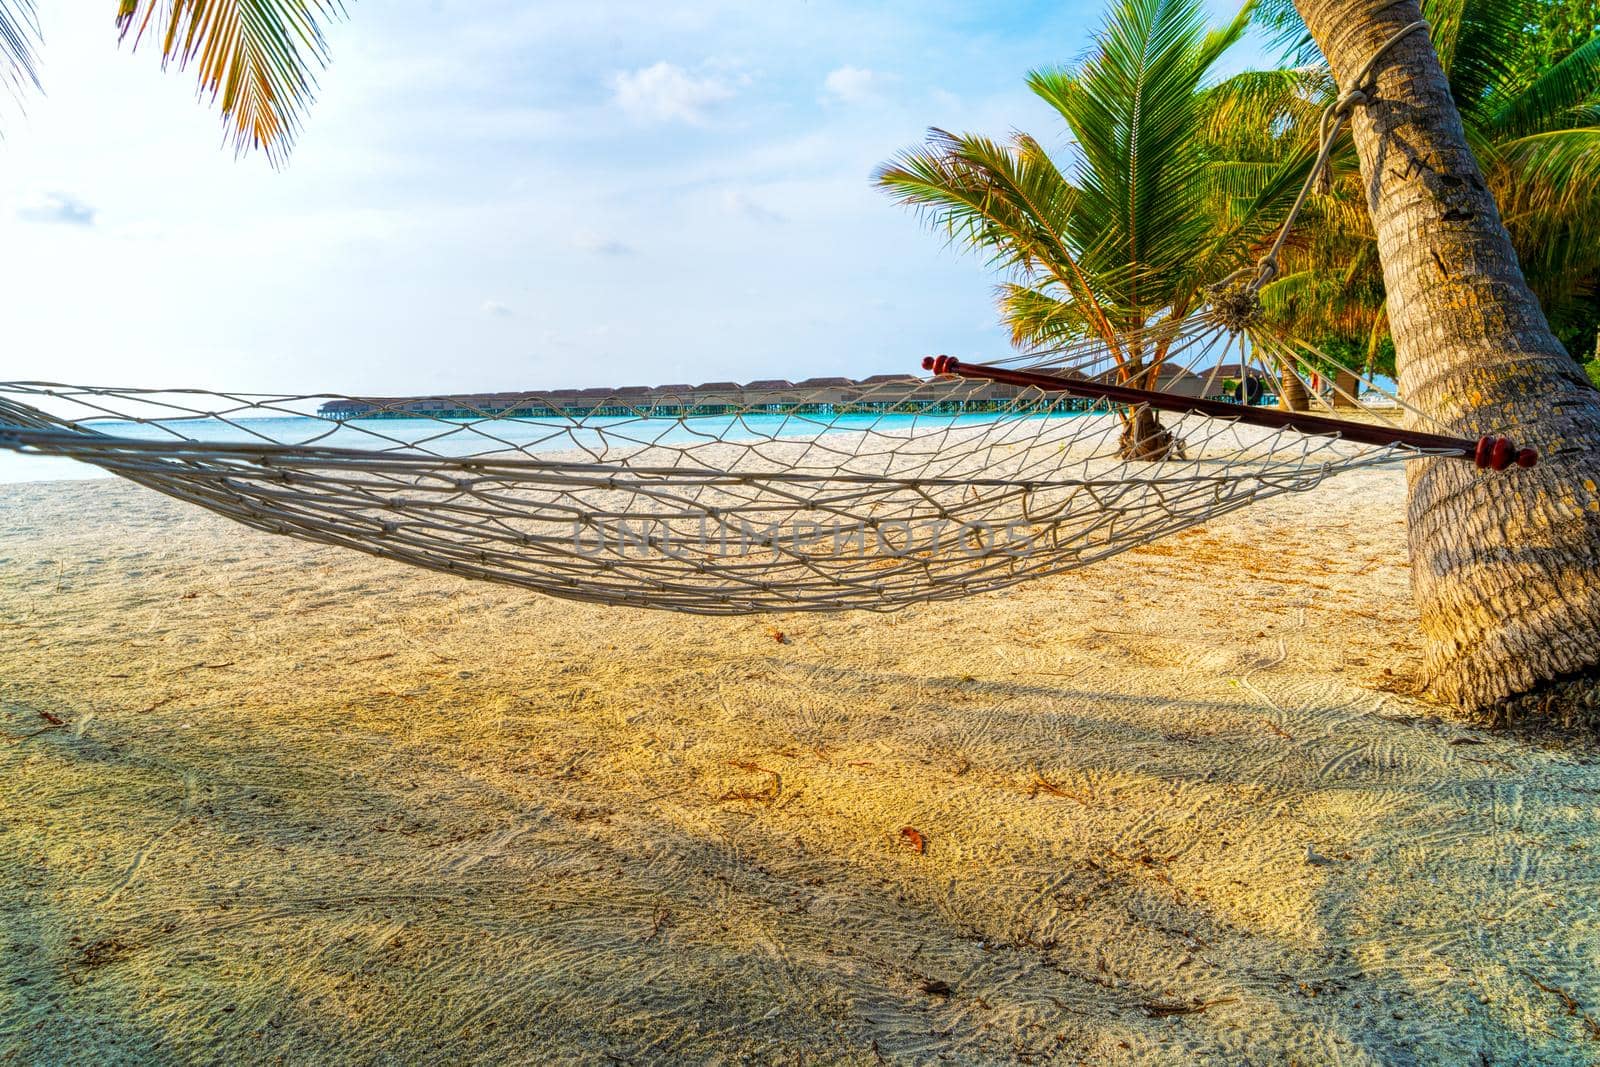 Maldives. Paradise on earth.Empty hammock between palms trees at sandy beach. View of nice tropical beach with palms around. Holiday and vacation concept